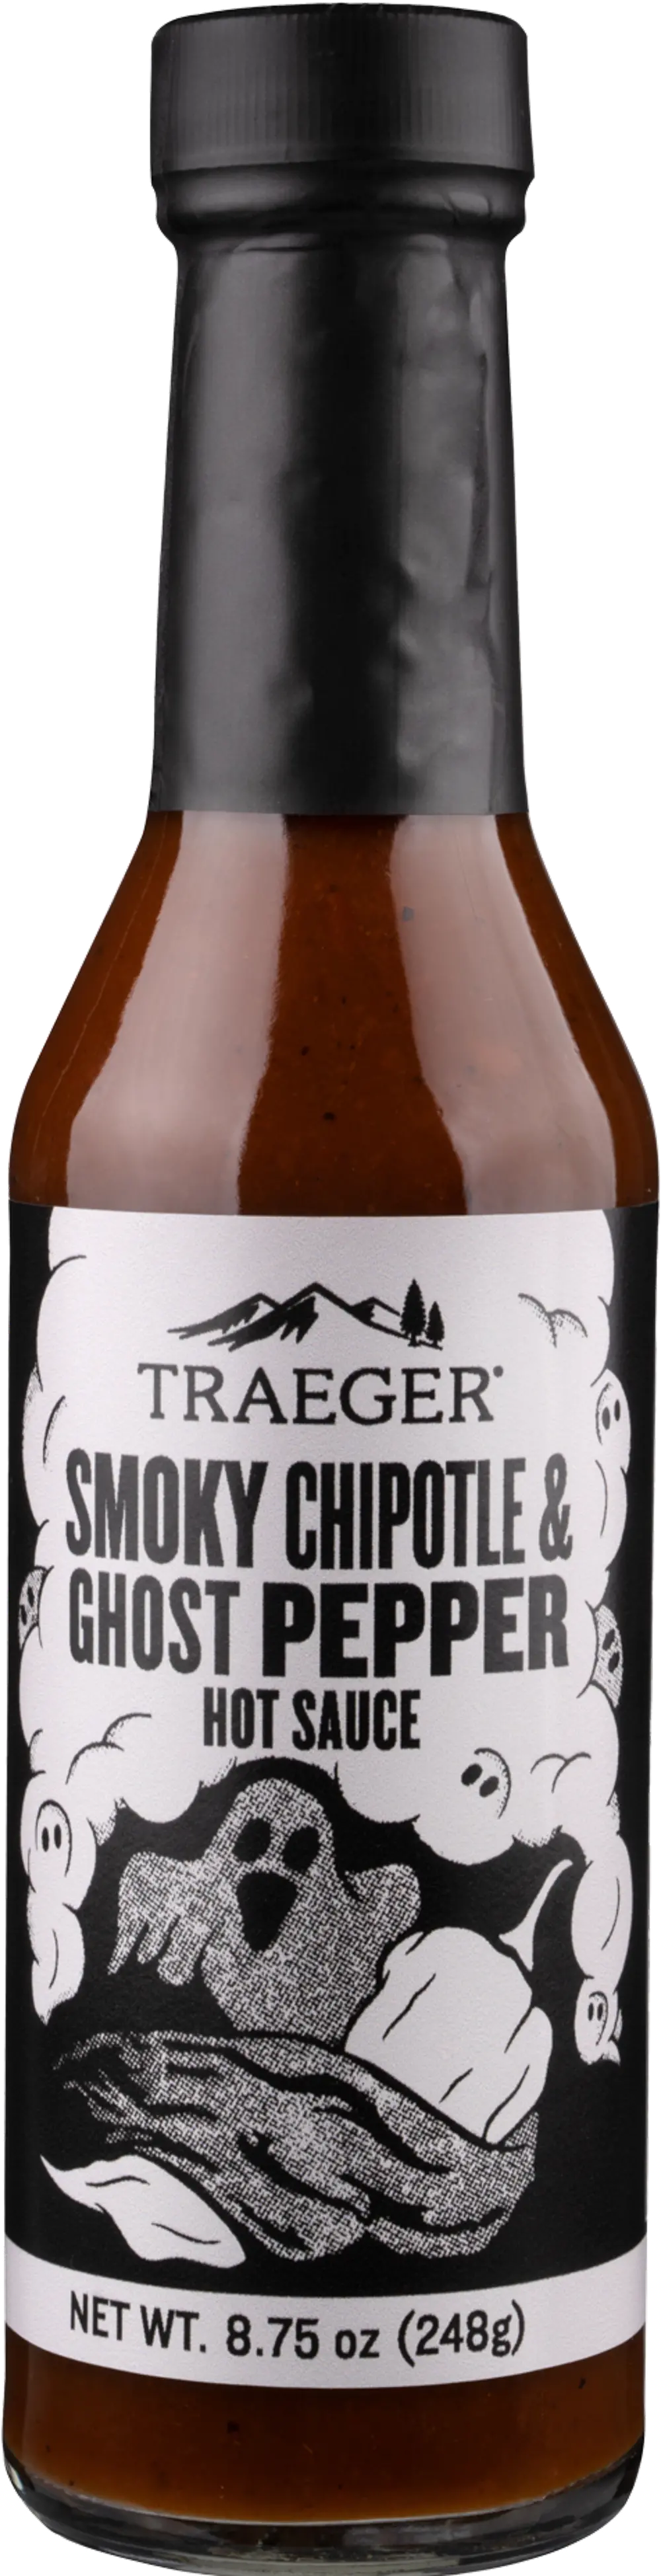 HOT002,CHIP_GHST_SAU Traeger Smoky Chipotle & Ghost Pepper Hot Sauce-1